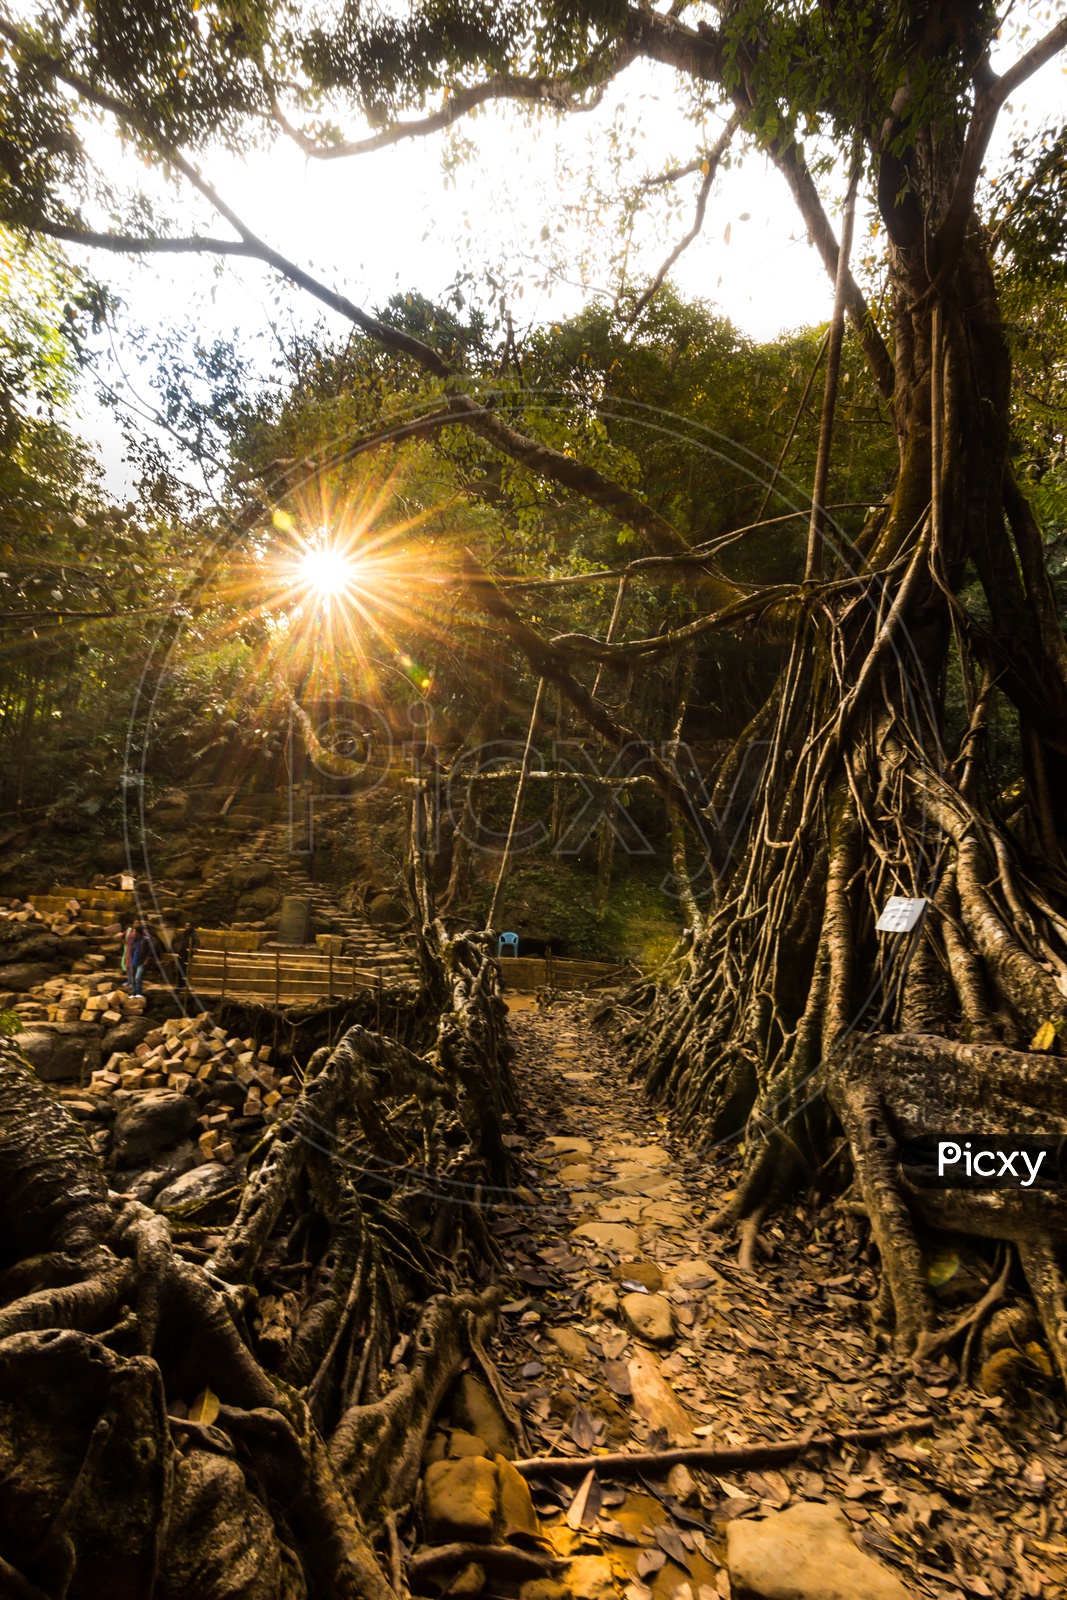 Naturally Formed Pathways With Canopy of Big Wild Trees in Tropical Forests of Meghalaya